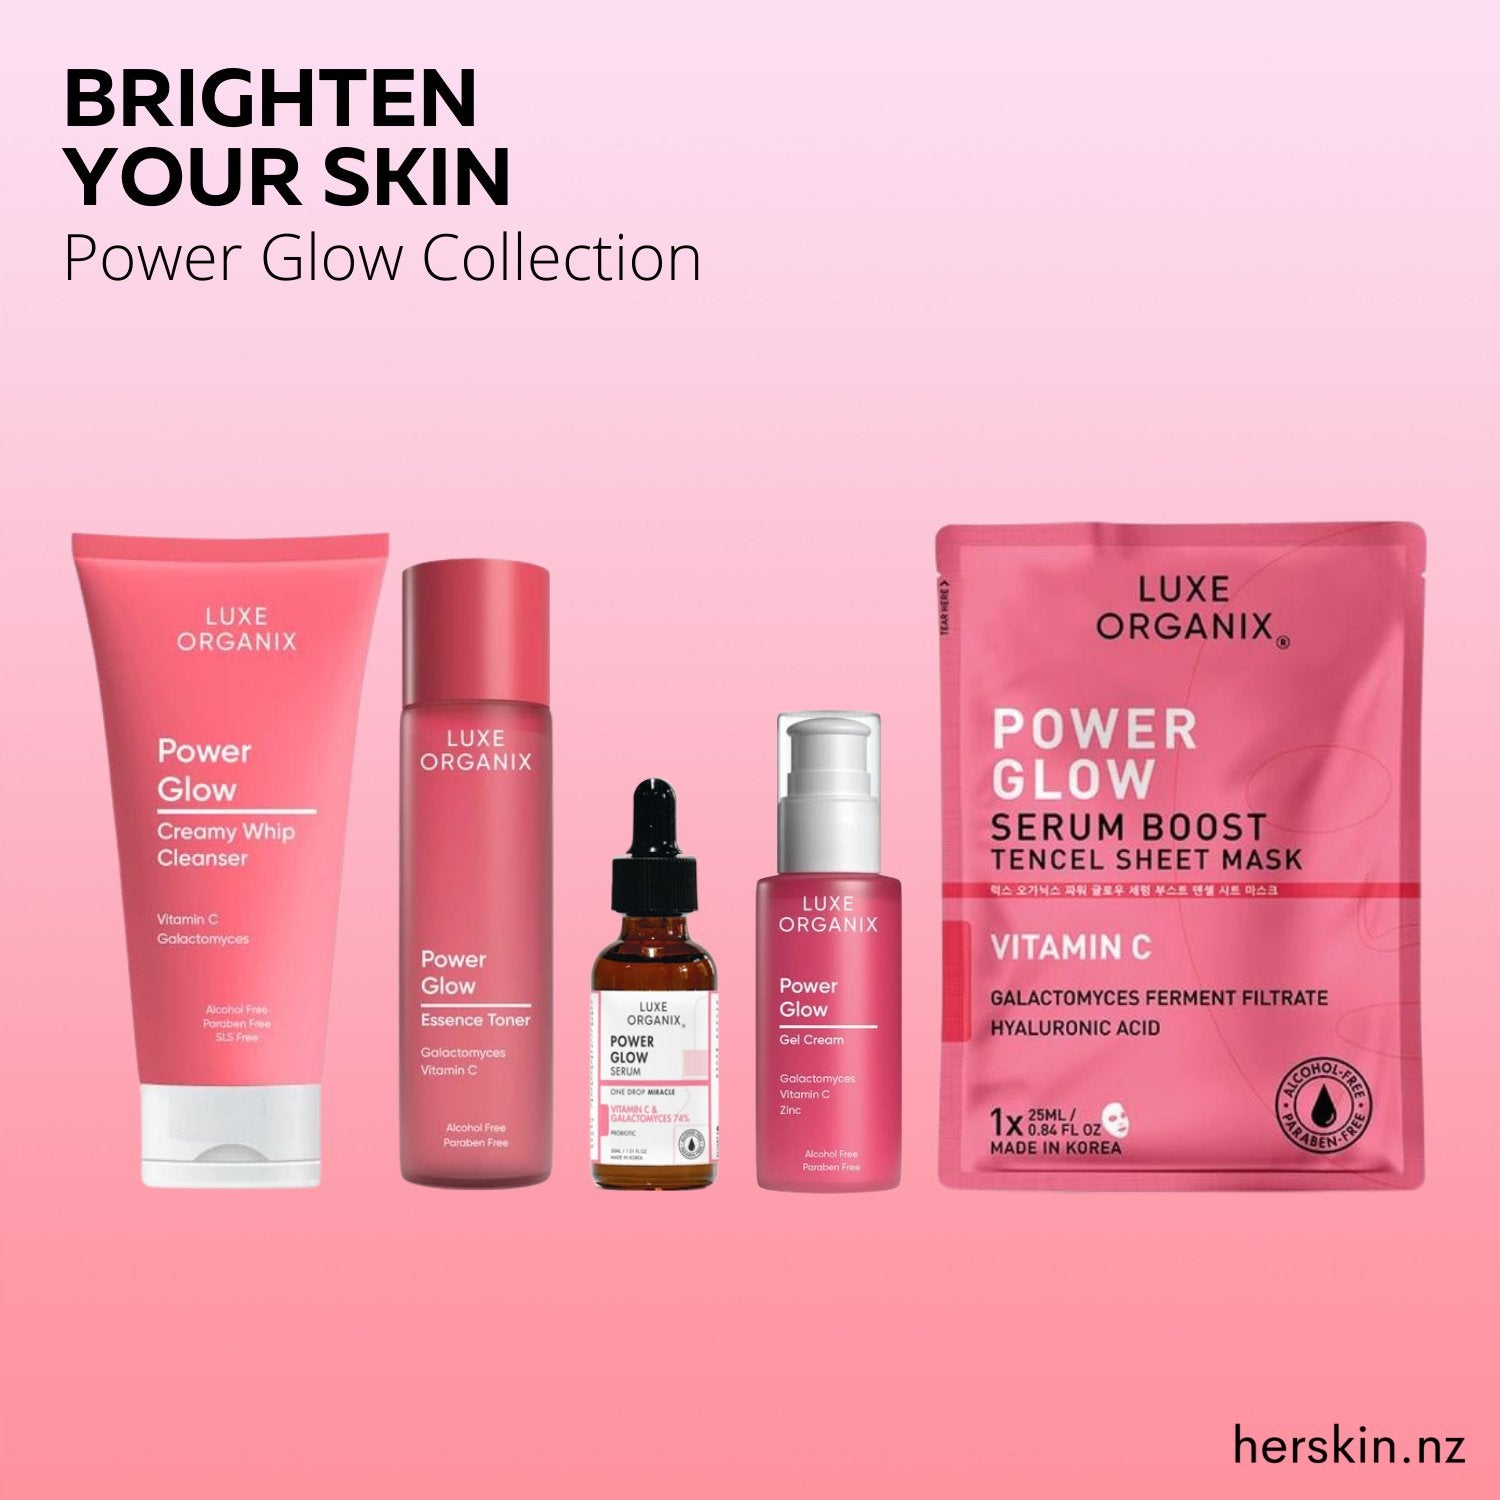 Power Glow Collection